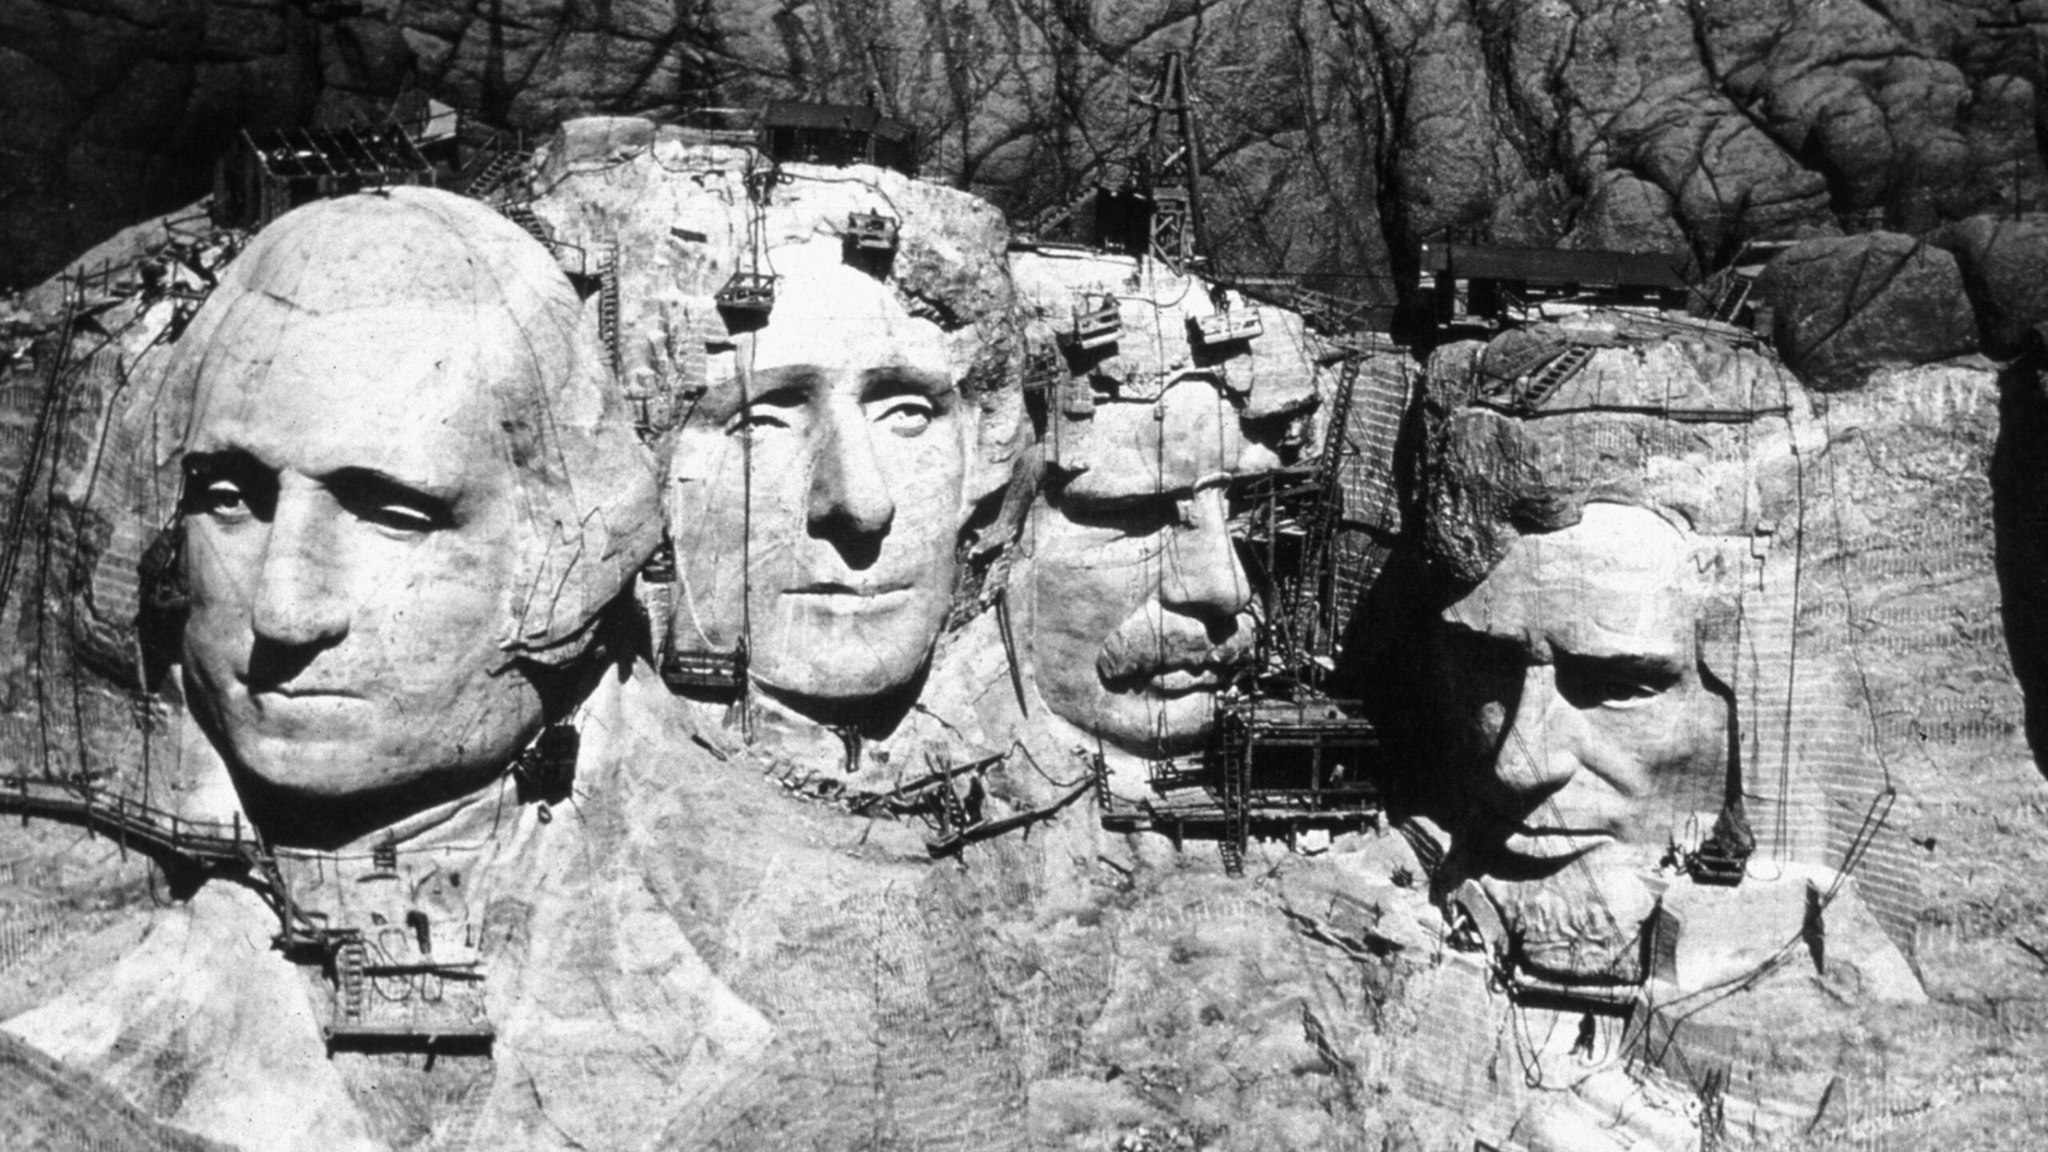 The memorial at Mount Rushmore, South Dakota under construction. The four heads are those of Presidents George Washington (1732 - 1799), Thomas Jefferson (1743 - 1826), Theodore Roosevelt (1858 - 1919) and Abraham Lincoln (1809 - 1865).